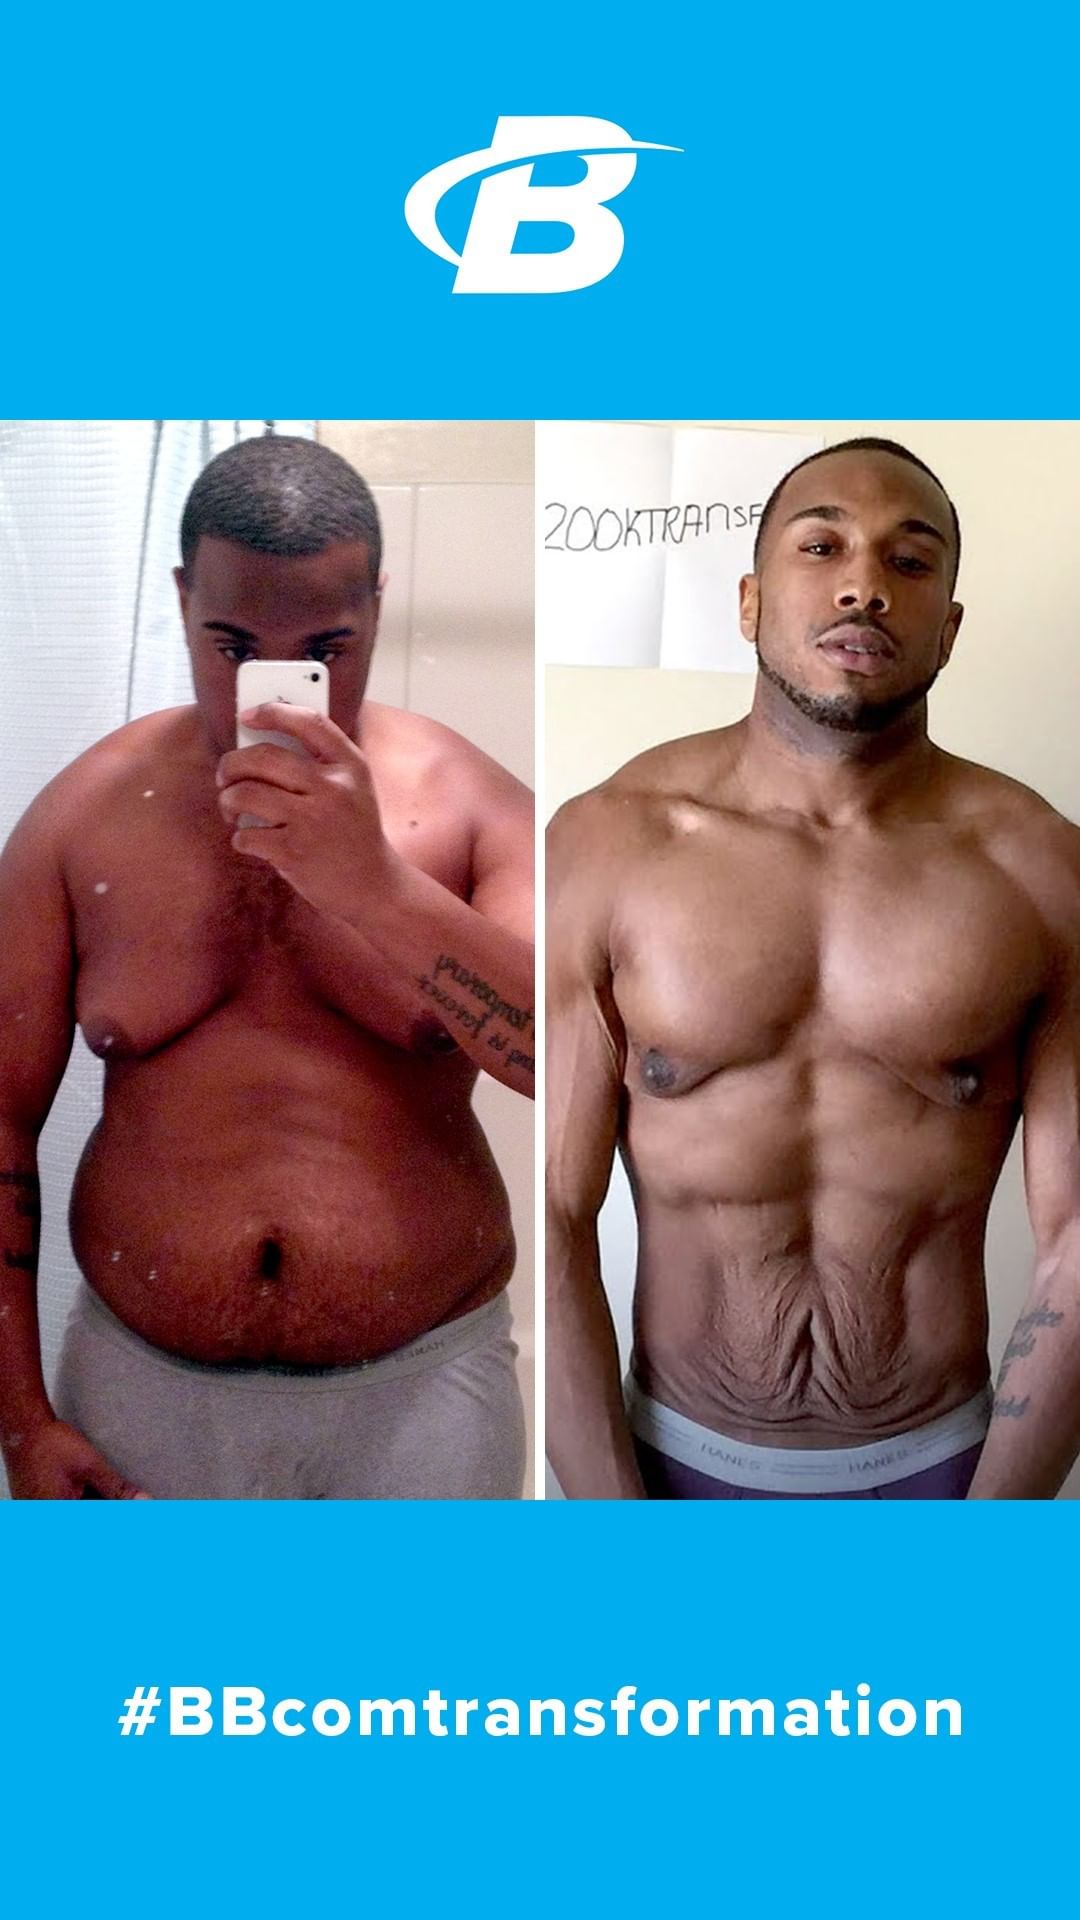 Bodybuilding.com - When weight gain and a major life change zapped Darnell's confidence, he found emotional balance at the gym. After losing around 100 pounds, this fit father is loving life again!

►...